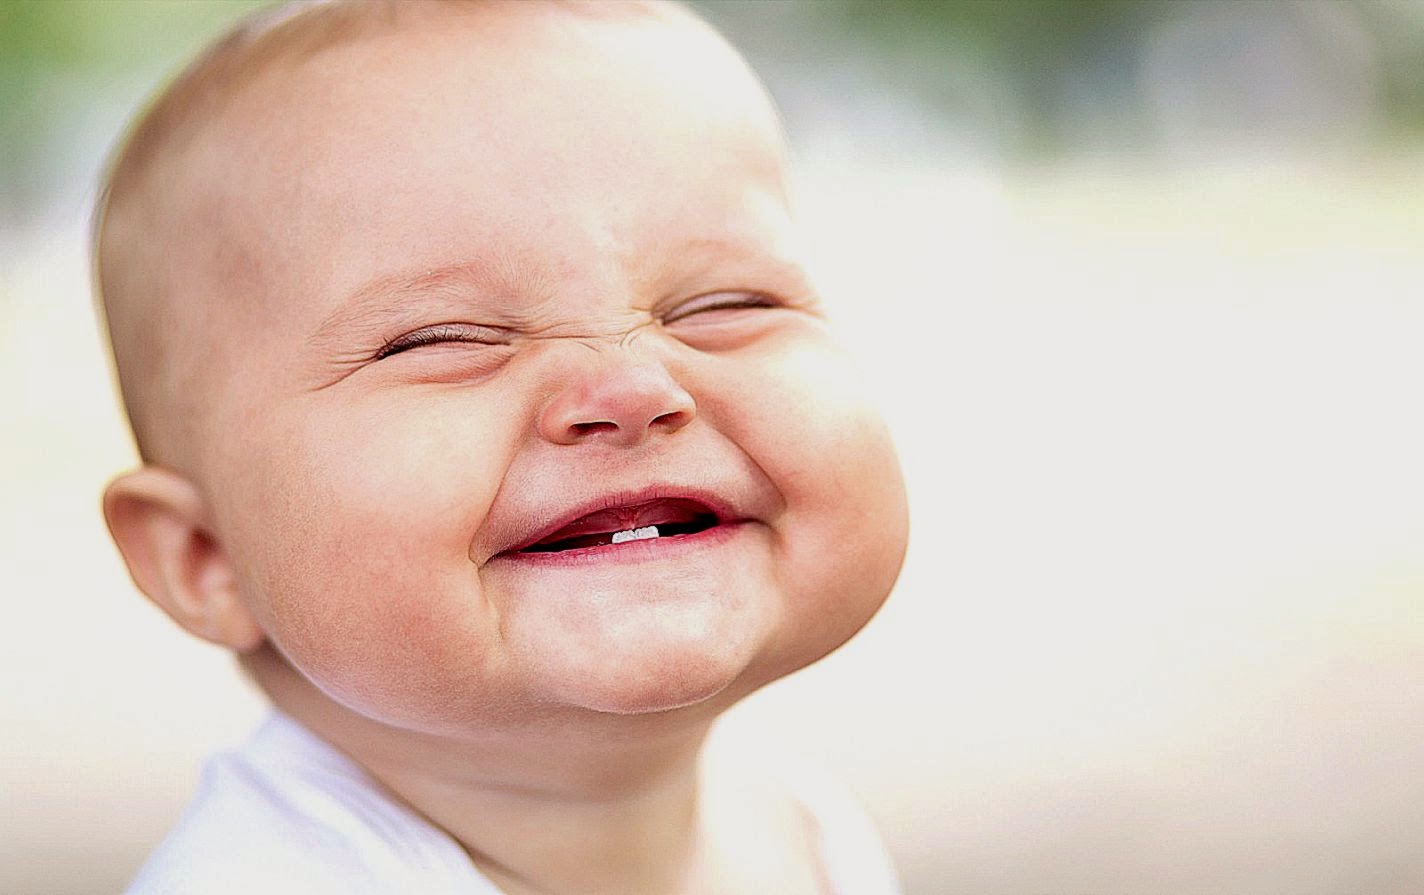 Free download Cute Babies Picture Cute Happy Baby amp Kids Wallpaper [1424x895] for your Desktop, Mobile & Tablet. Explore Happy Cute Babies Wallpaper. Cute Babies Wallpaper Free Download, Smiling